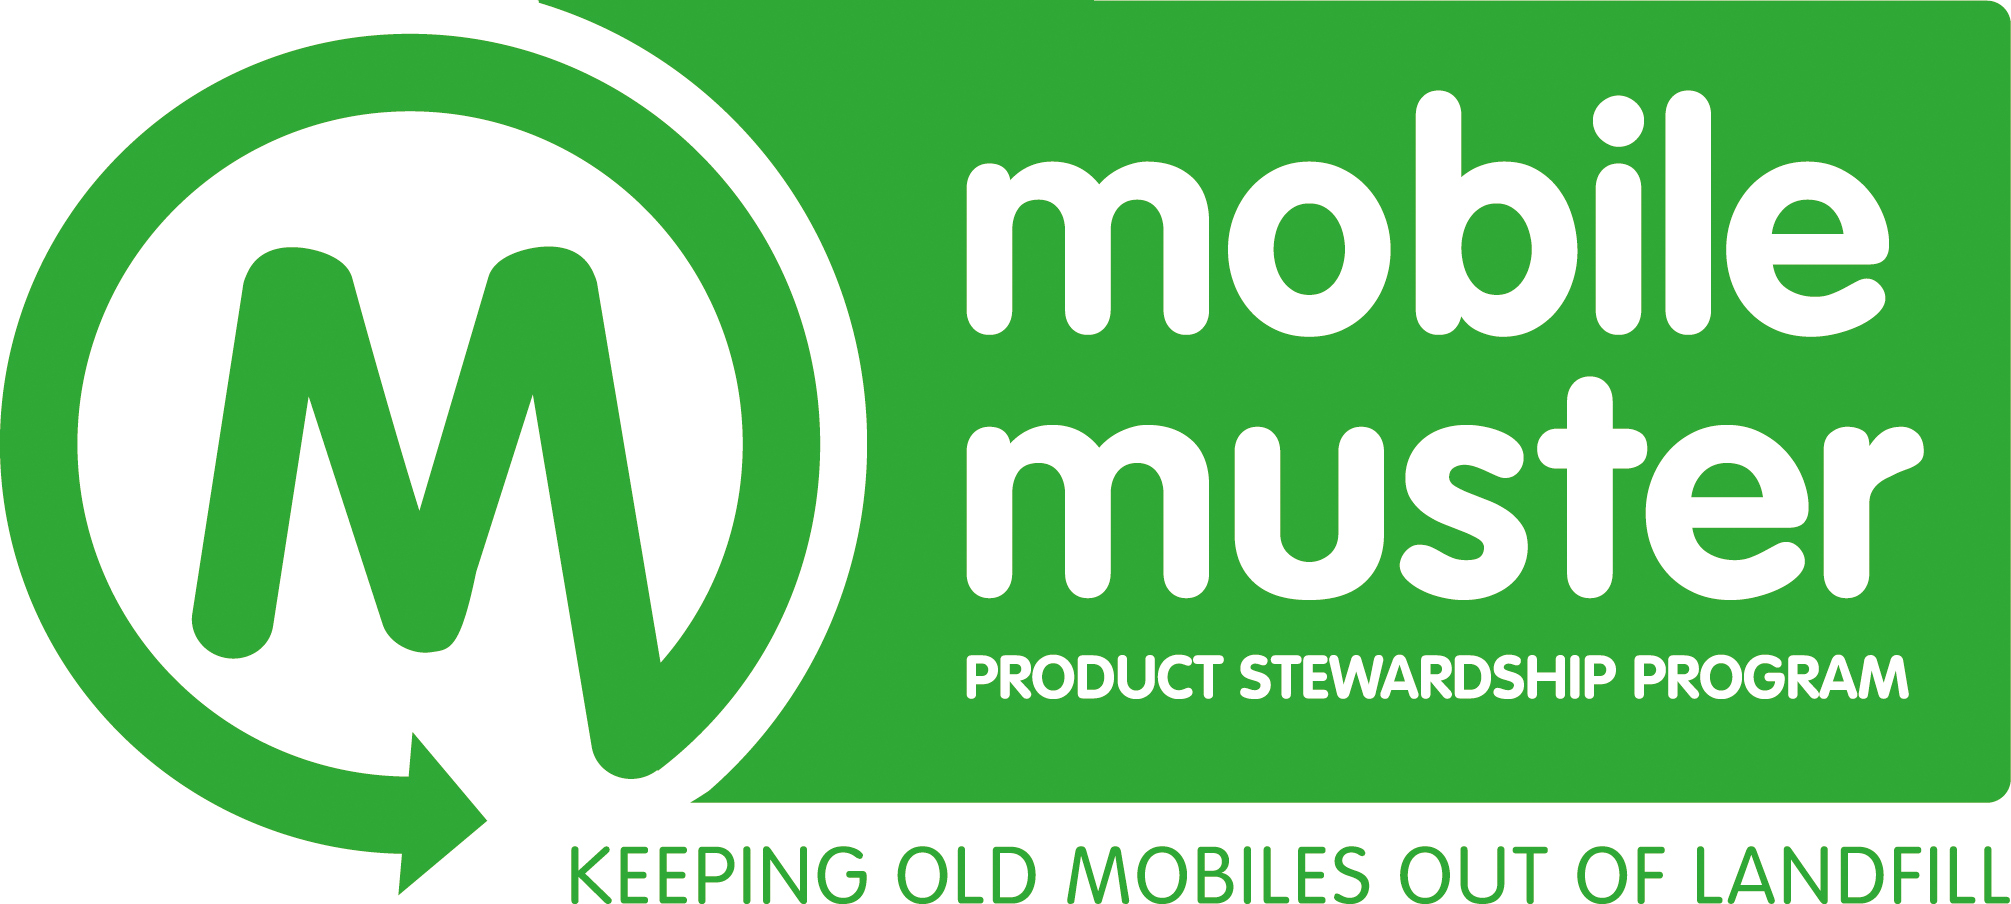 Mobile muster